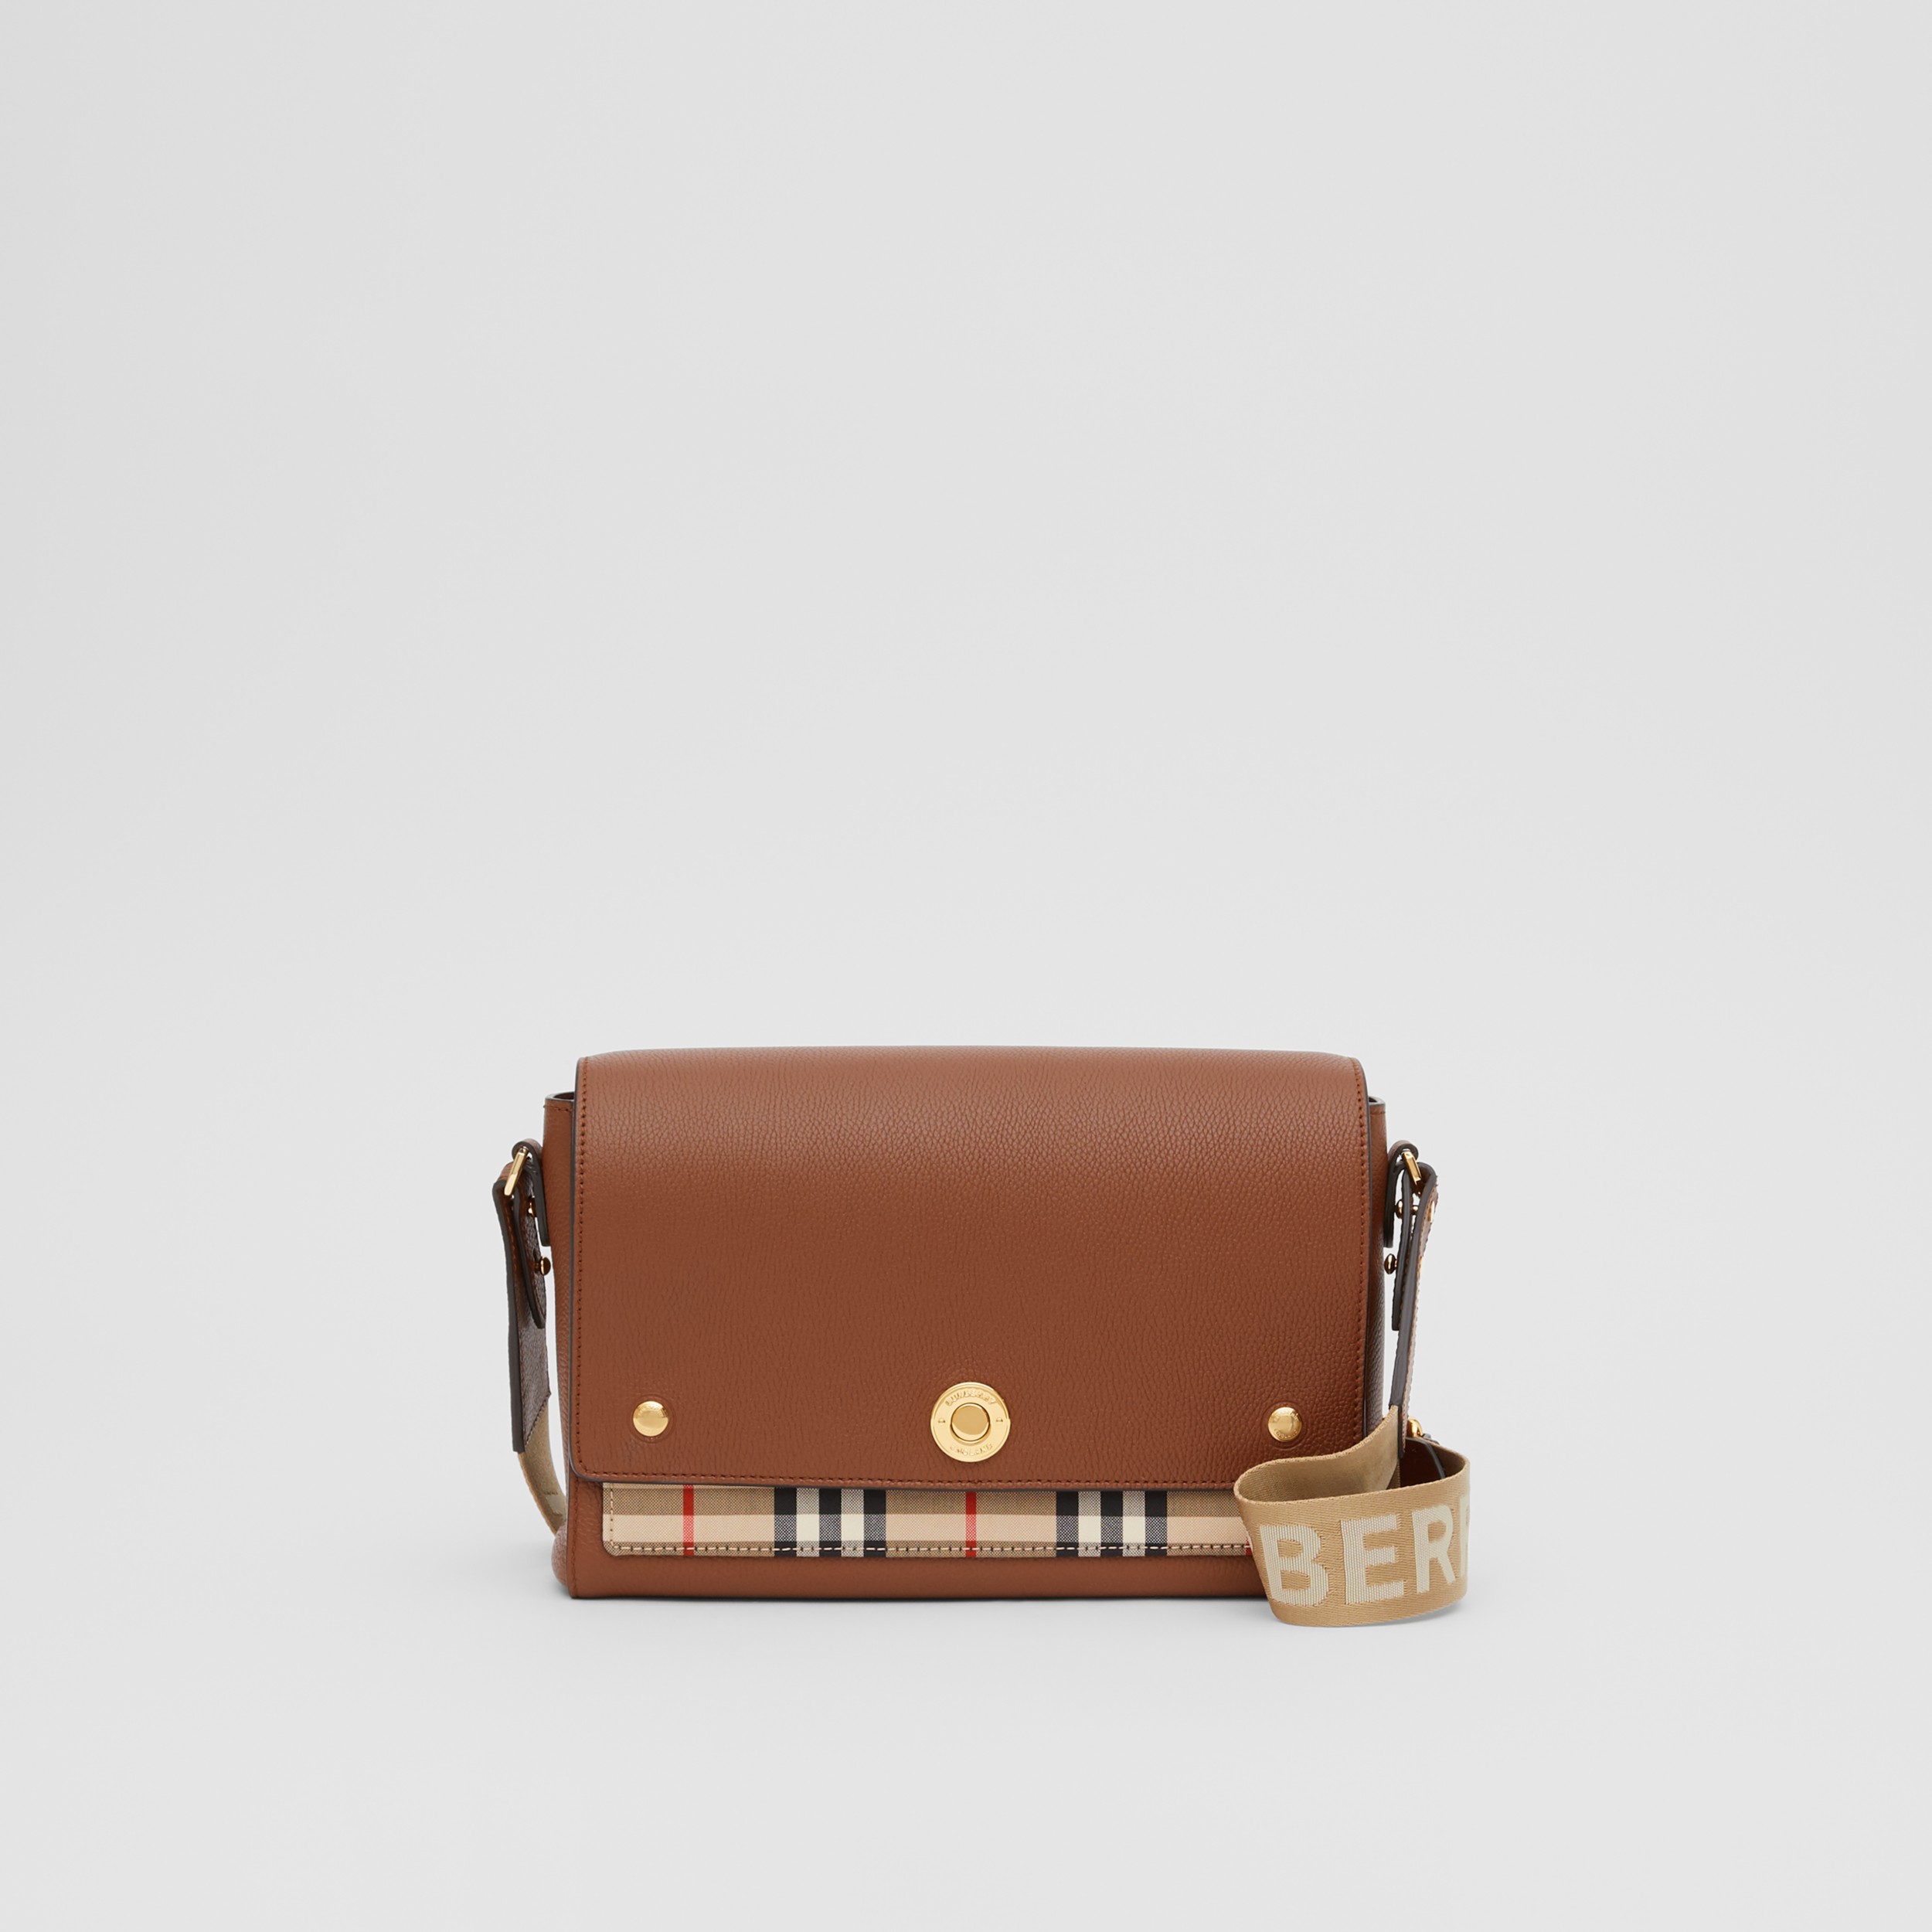 Leather and Vintage Check Note Crossbody Bag in Tan - Women | Burberry United States - 1